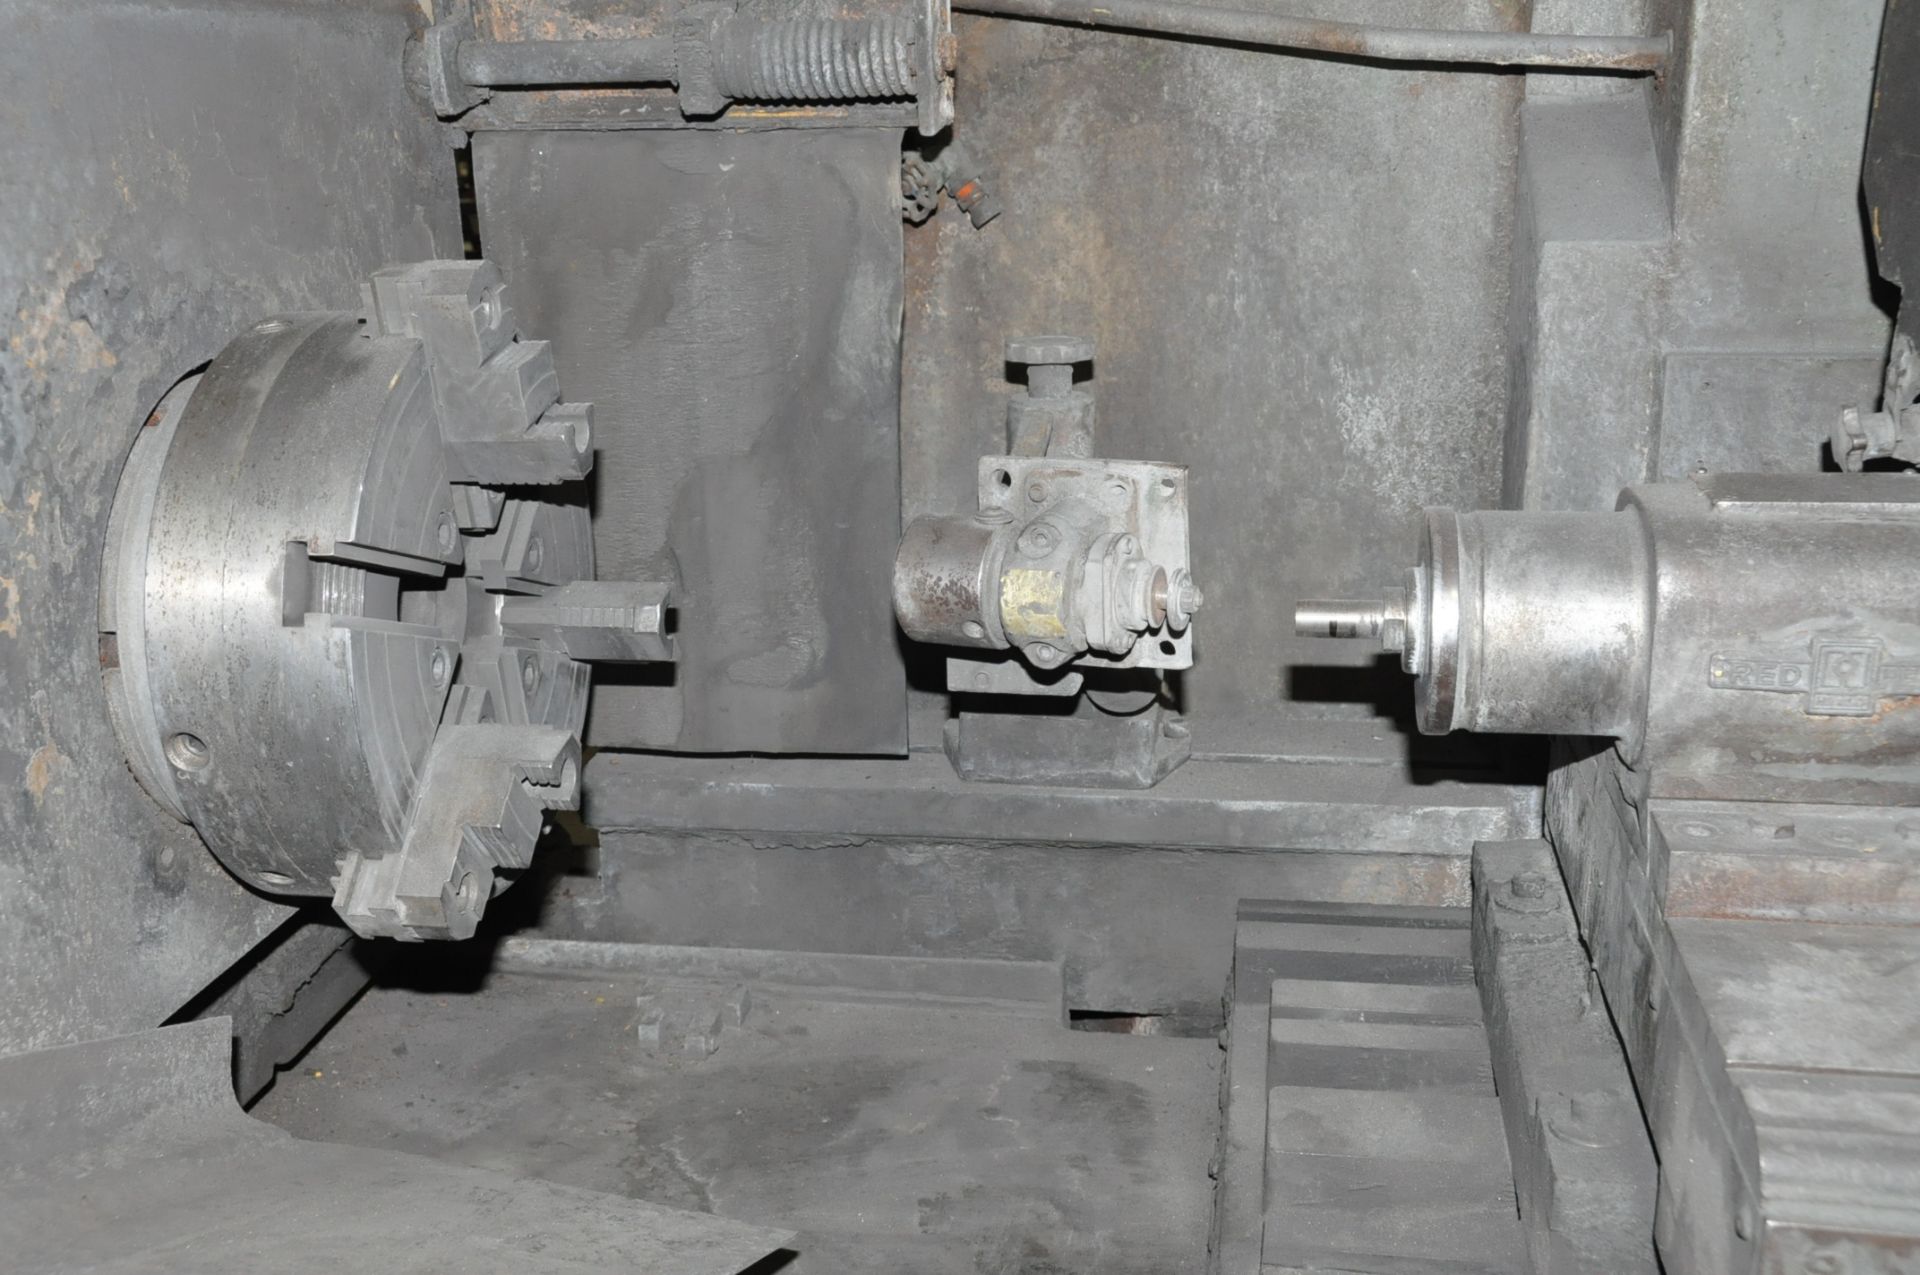 HEALD MODEL 273A, ID GRINDER, S/n G2540, Sinebar Workhead, 12" 6-Jaw Chuck, Coolant System - Image 2 of 4